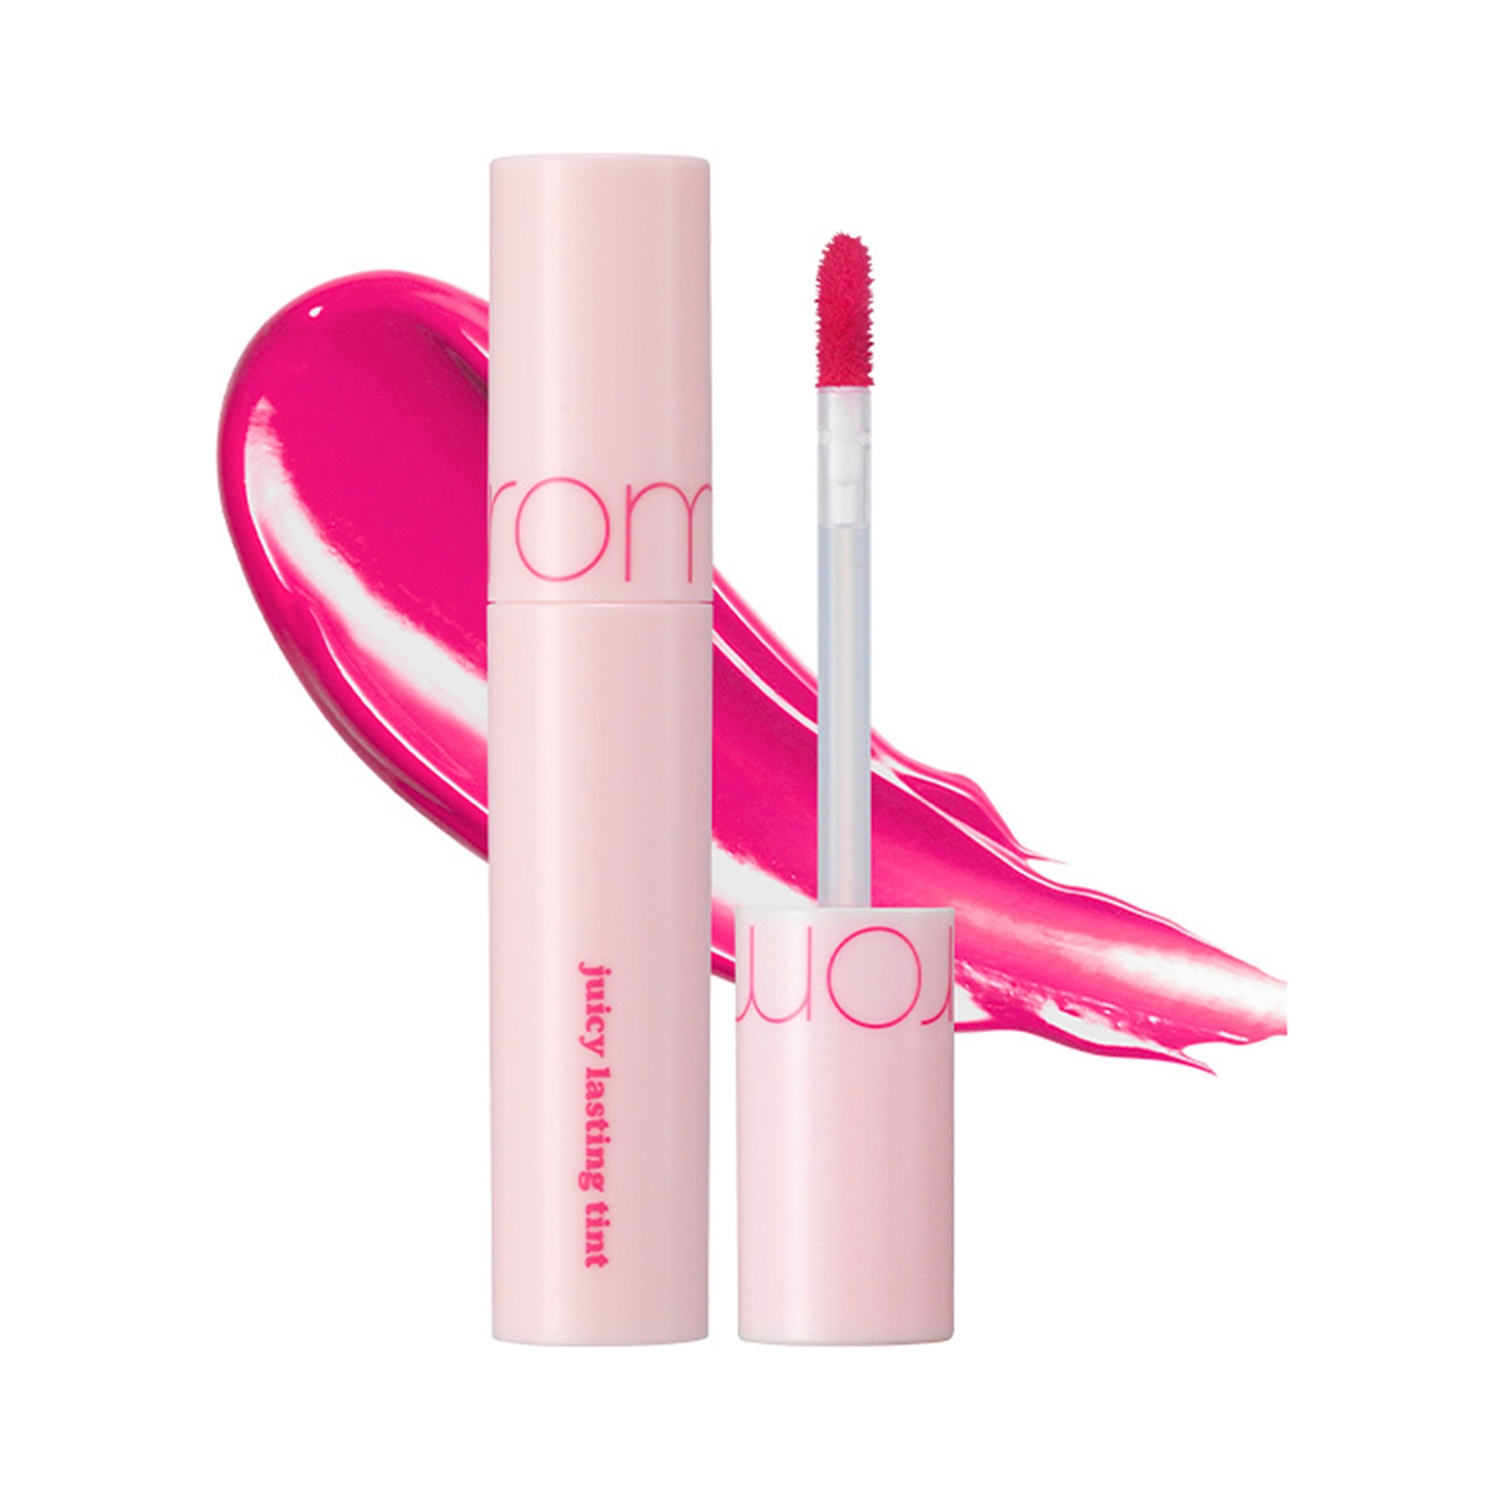 Rom&nd | Rom&nd Juicy Lasting Tint - 27 Pink Popsicle (5.5g)